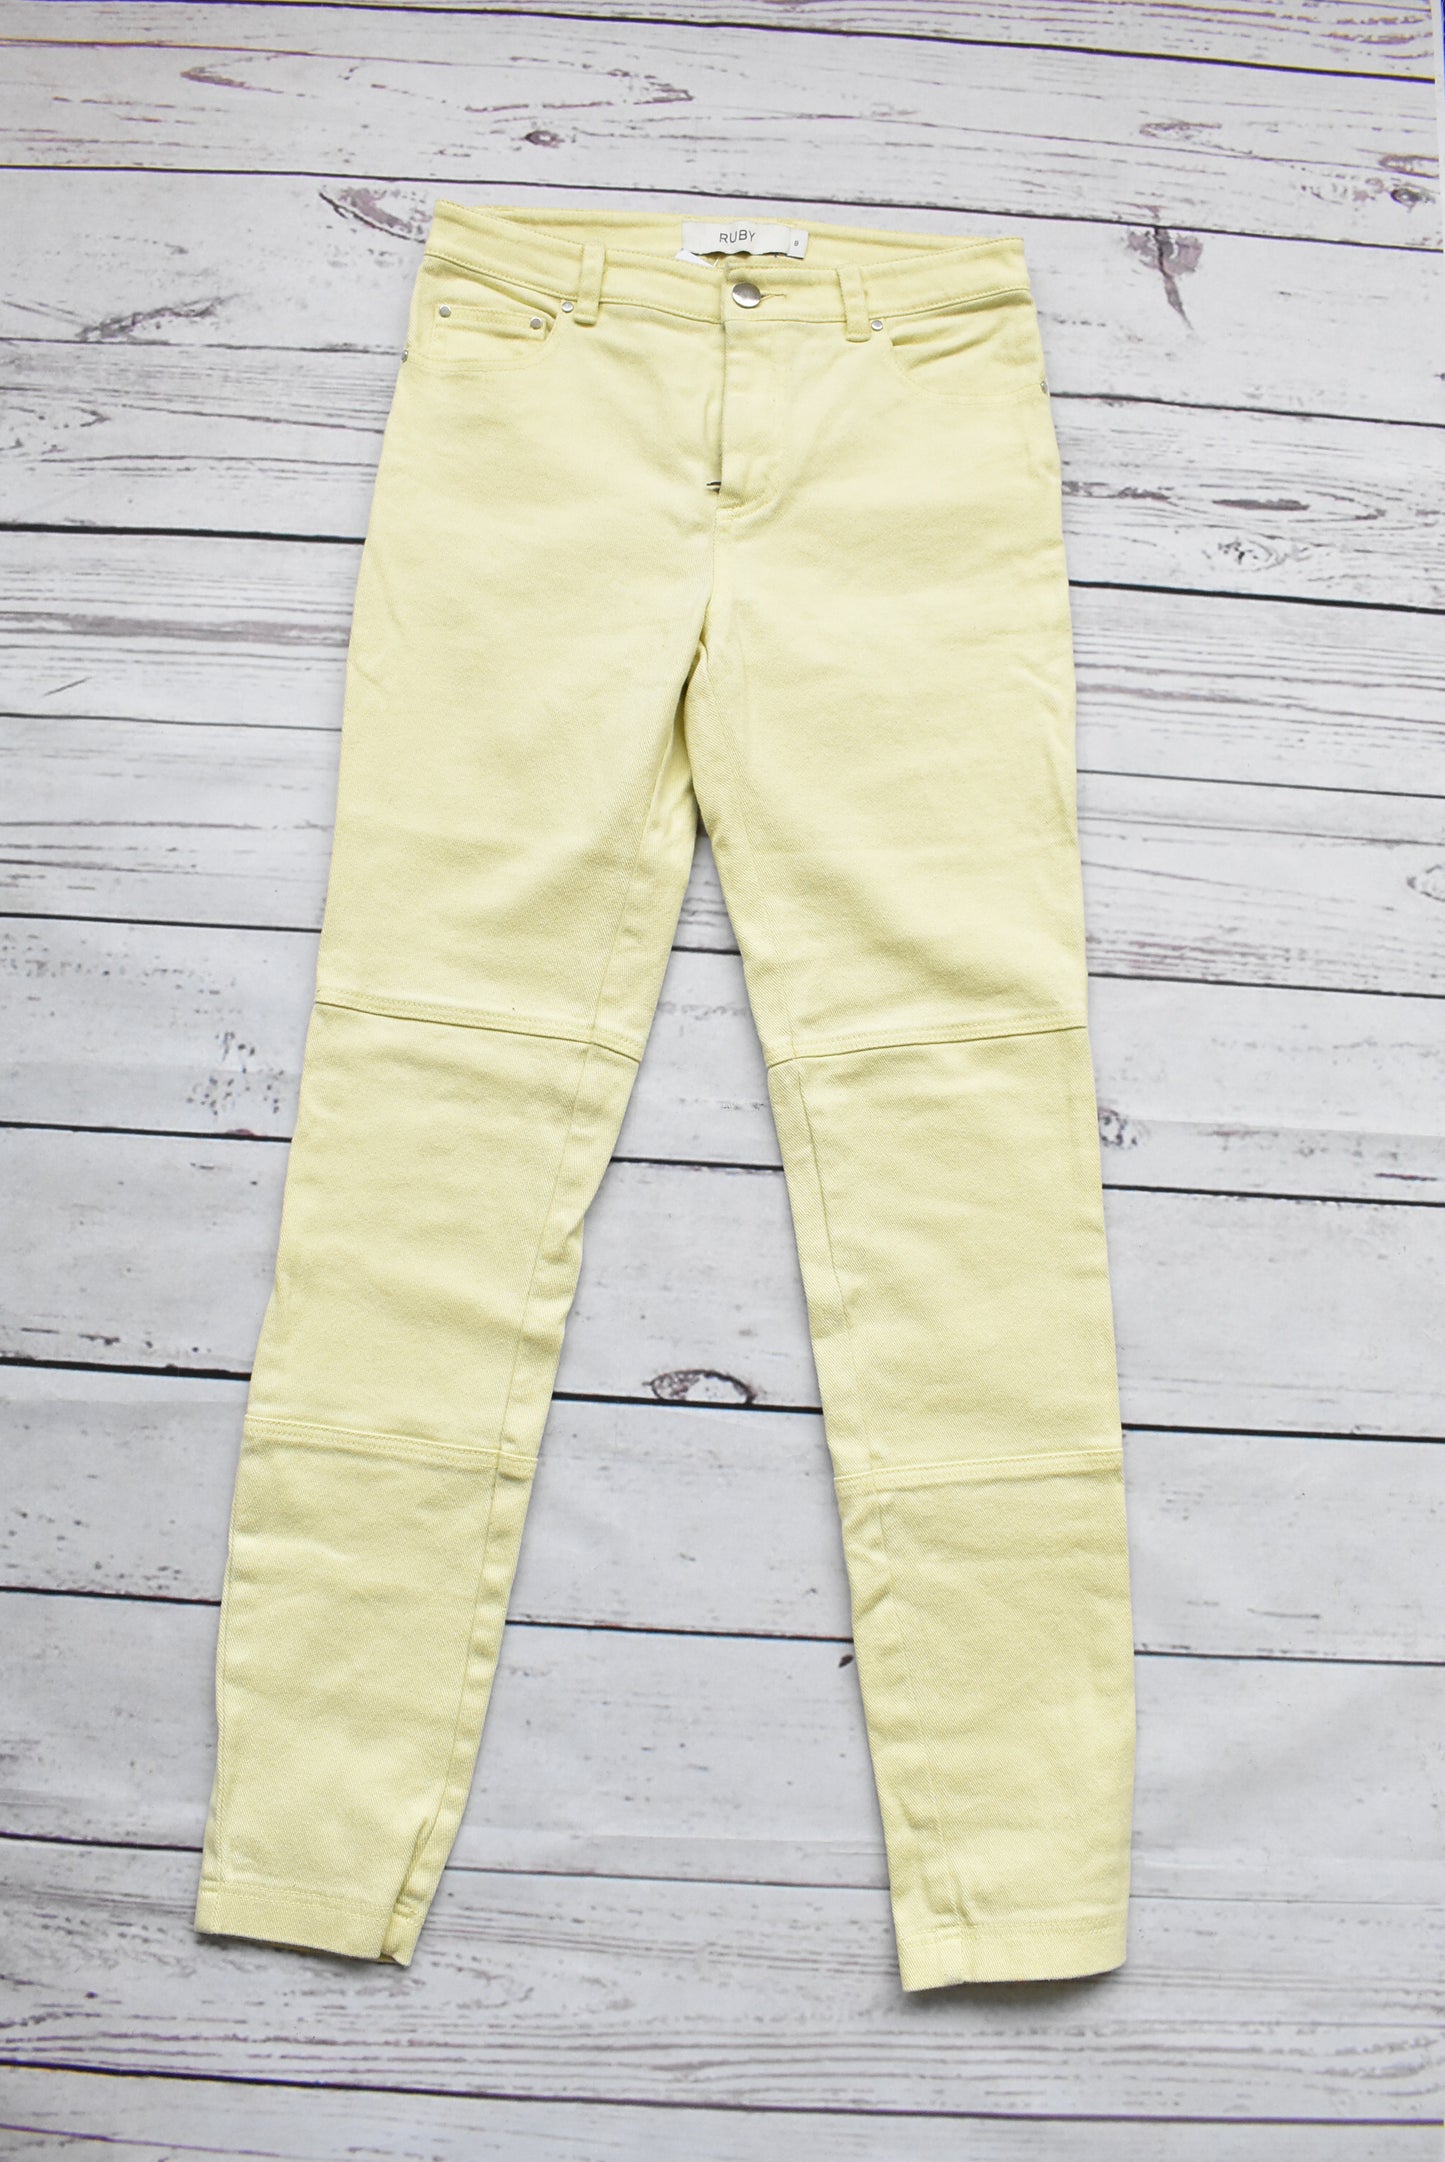 Ruby yellow skinny jeans, size 8